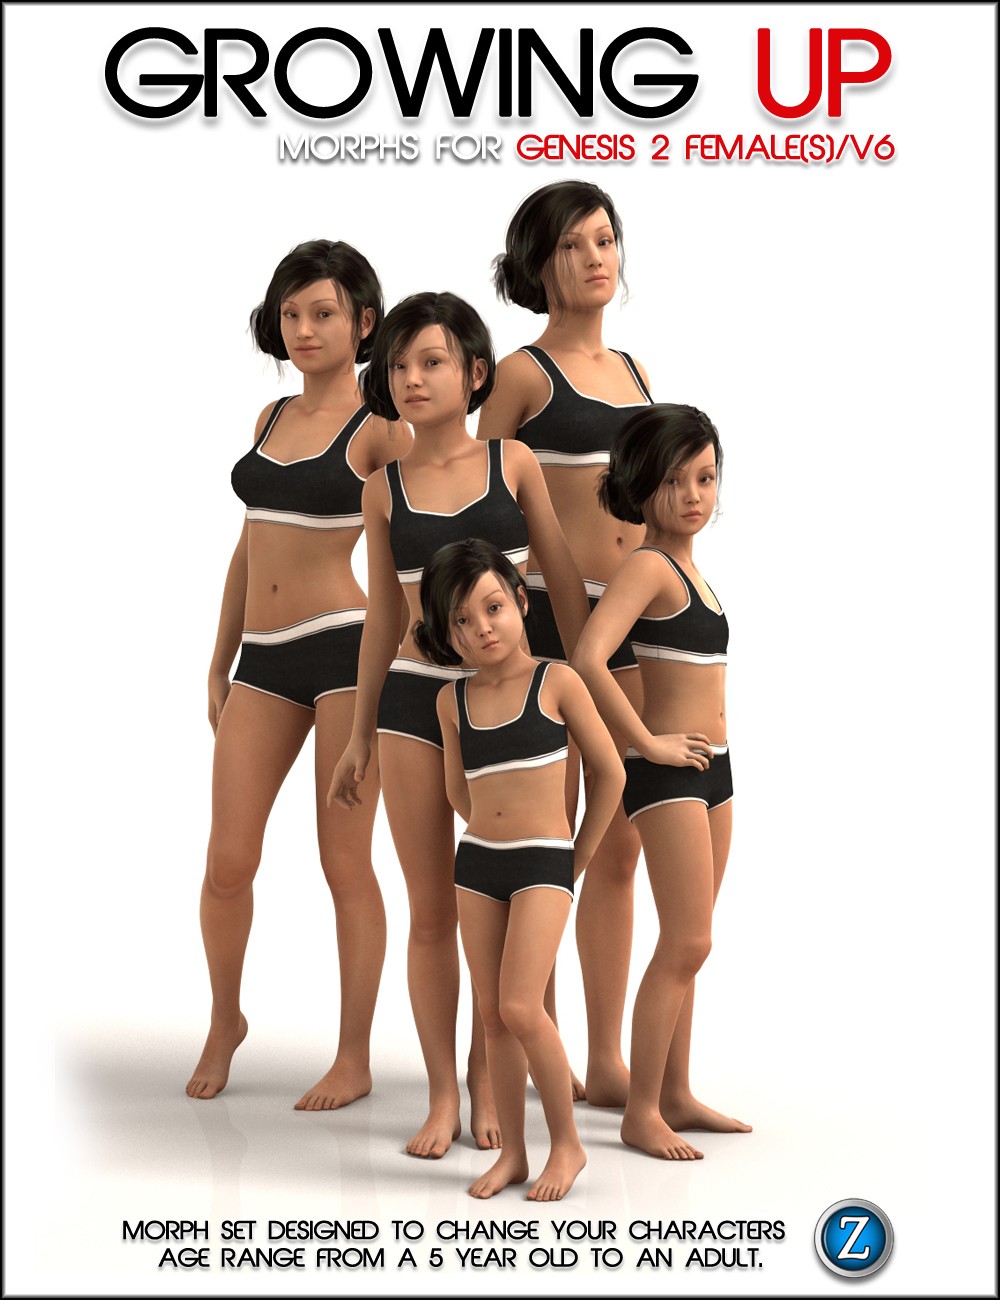 Growing Up for Genesis2 Female(s) and V6